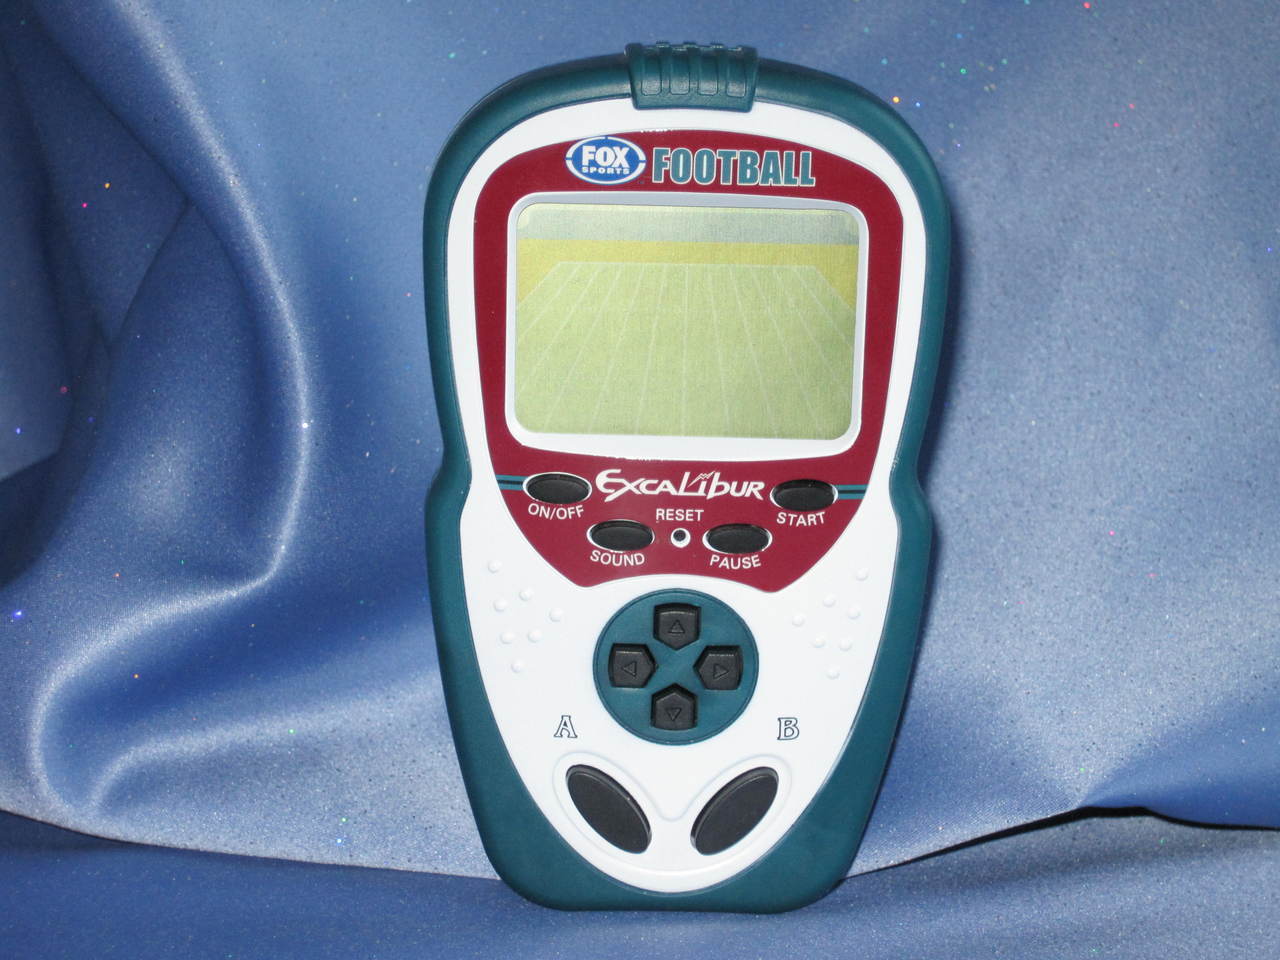 Football Electronic Handheld Game by Fox Sports. - $25.00